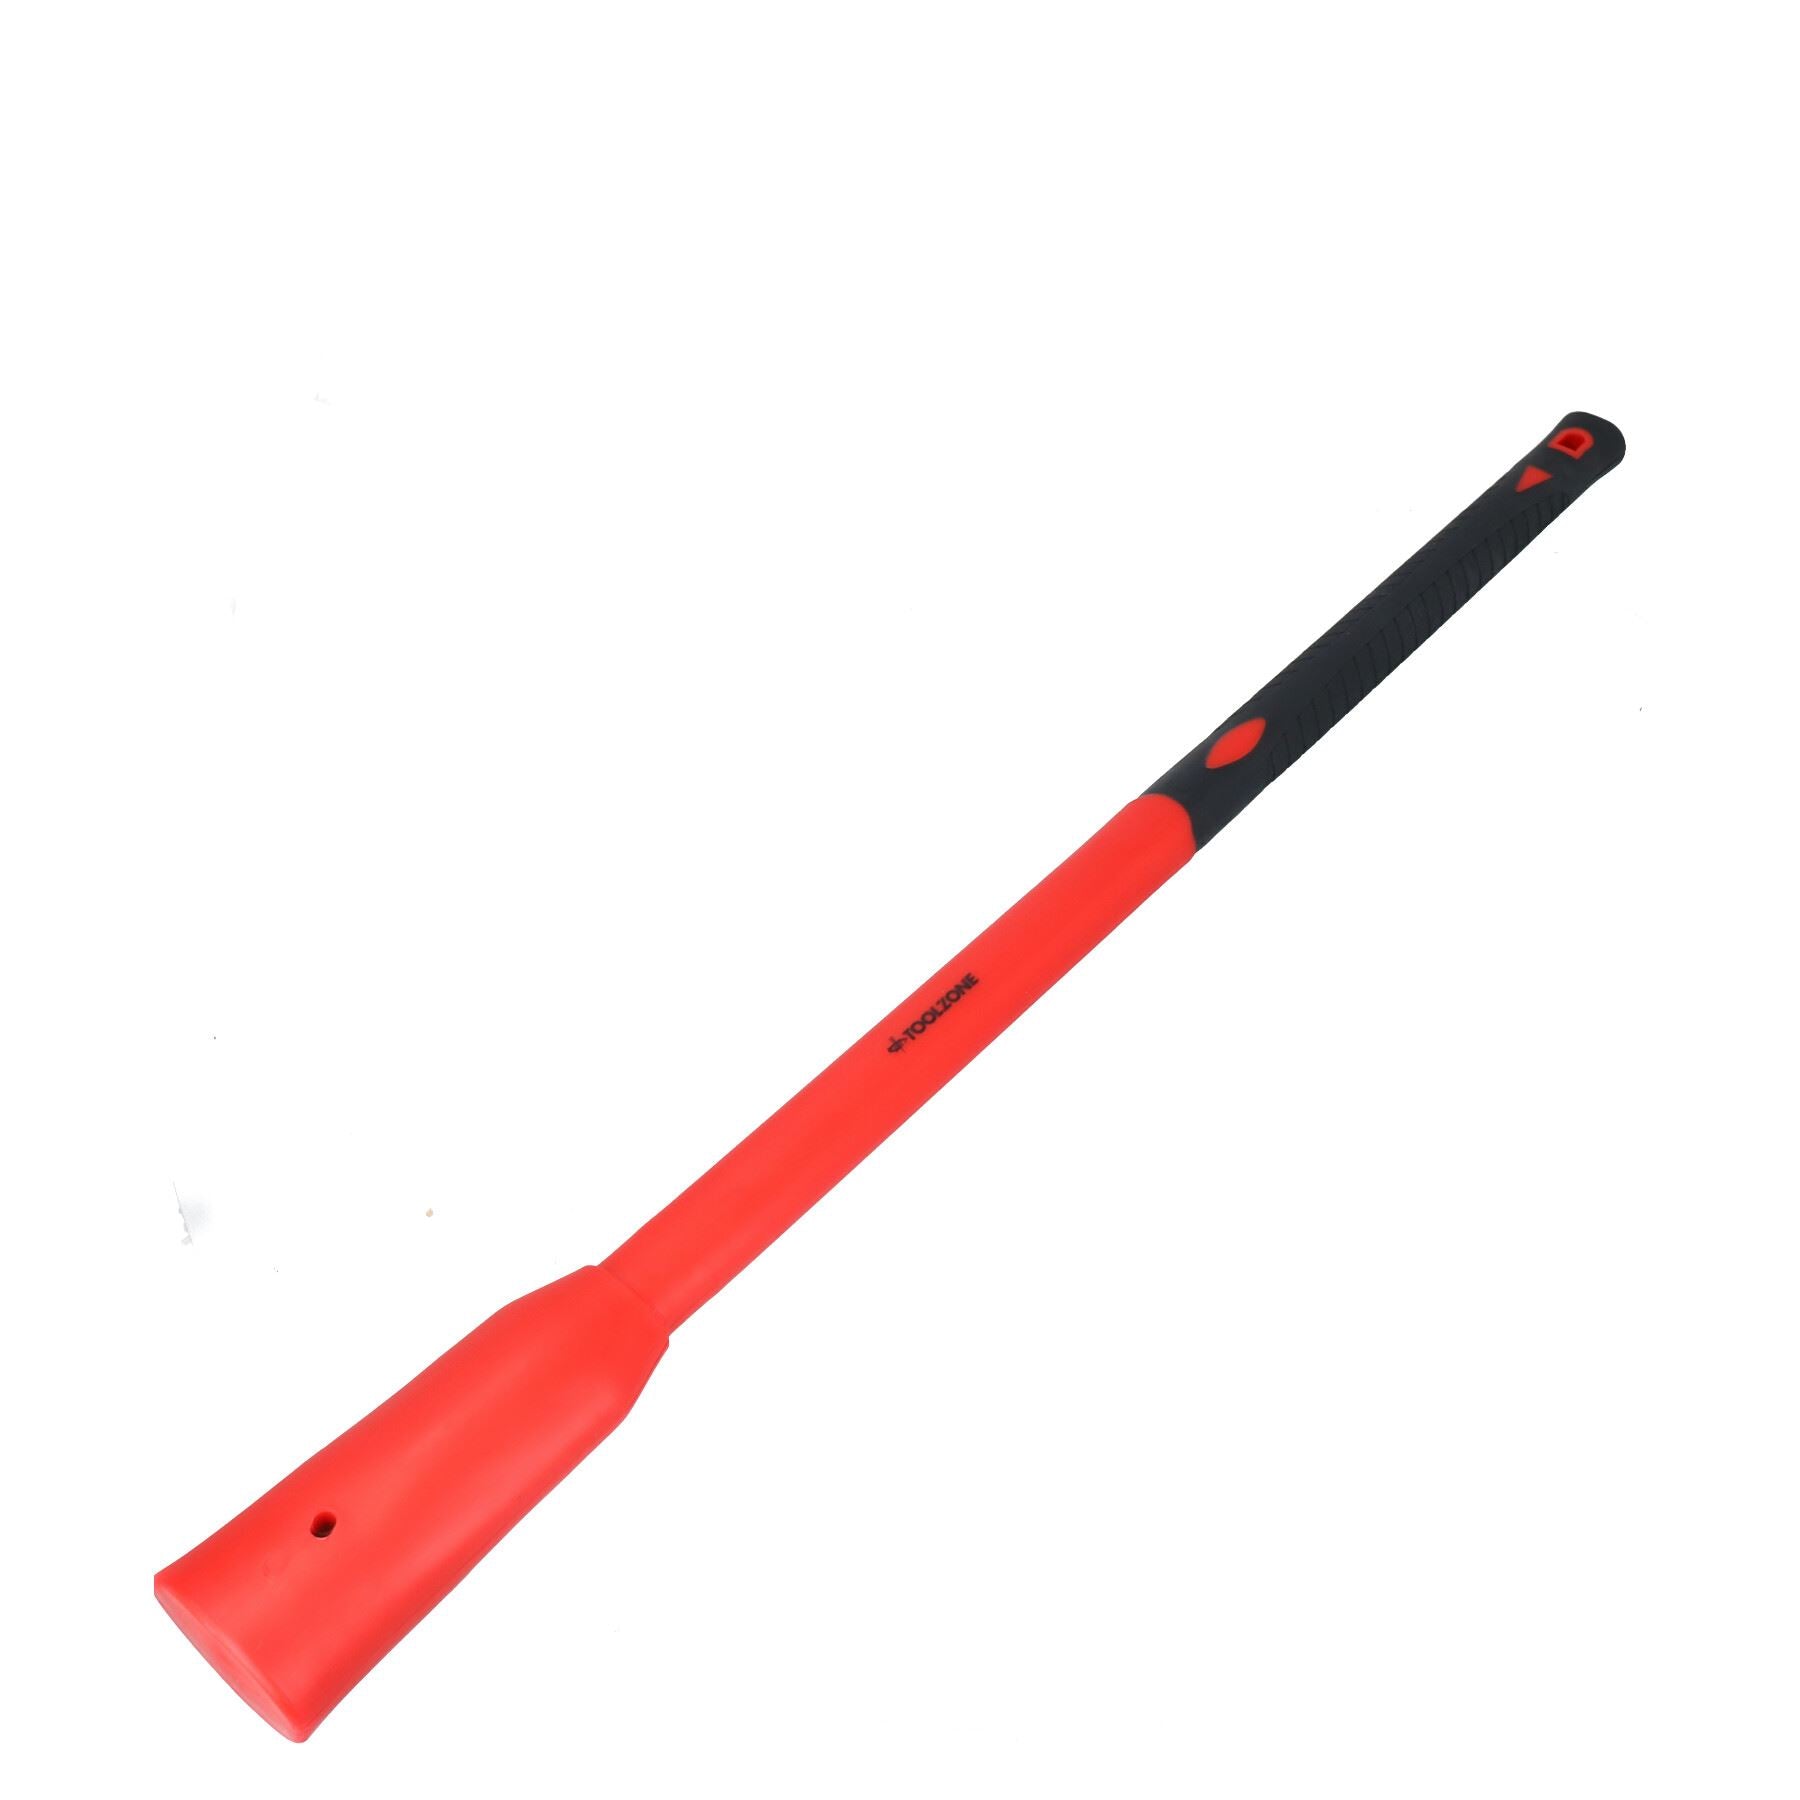 6kg Rubber Paving Maul For Slabs Flagstones Kerbs Laying Fibreglass Handle